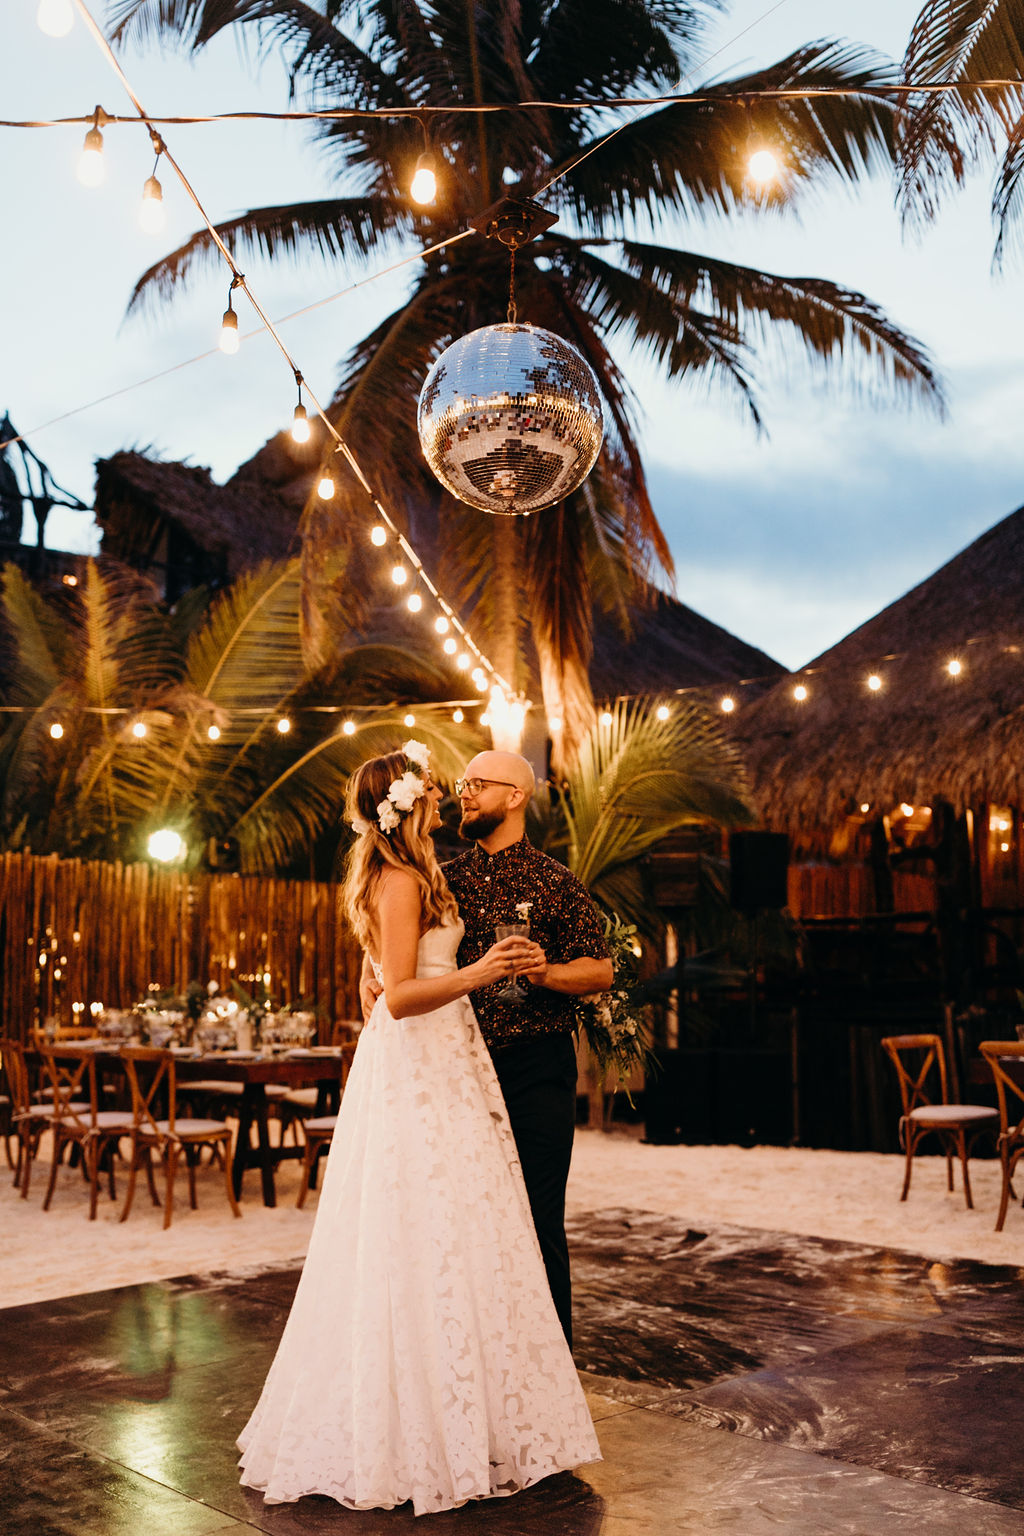 Bride and Groom share their first dance on a wood dance floor under a glimmering disco ball and string lights, Plam trees in the background at Akiin Beach Wedding